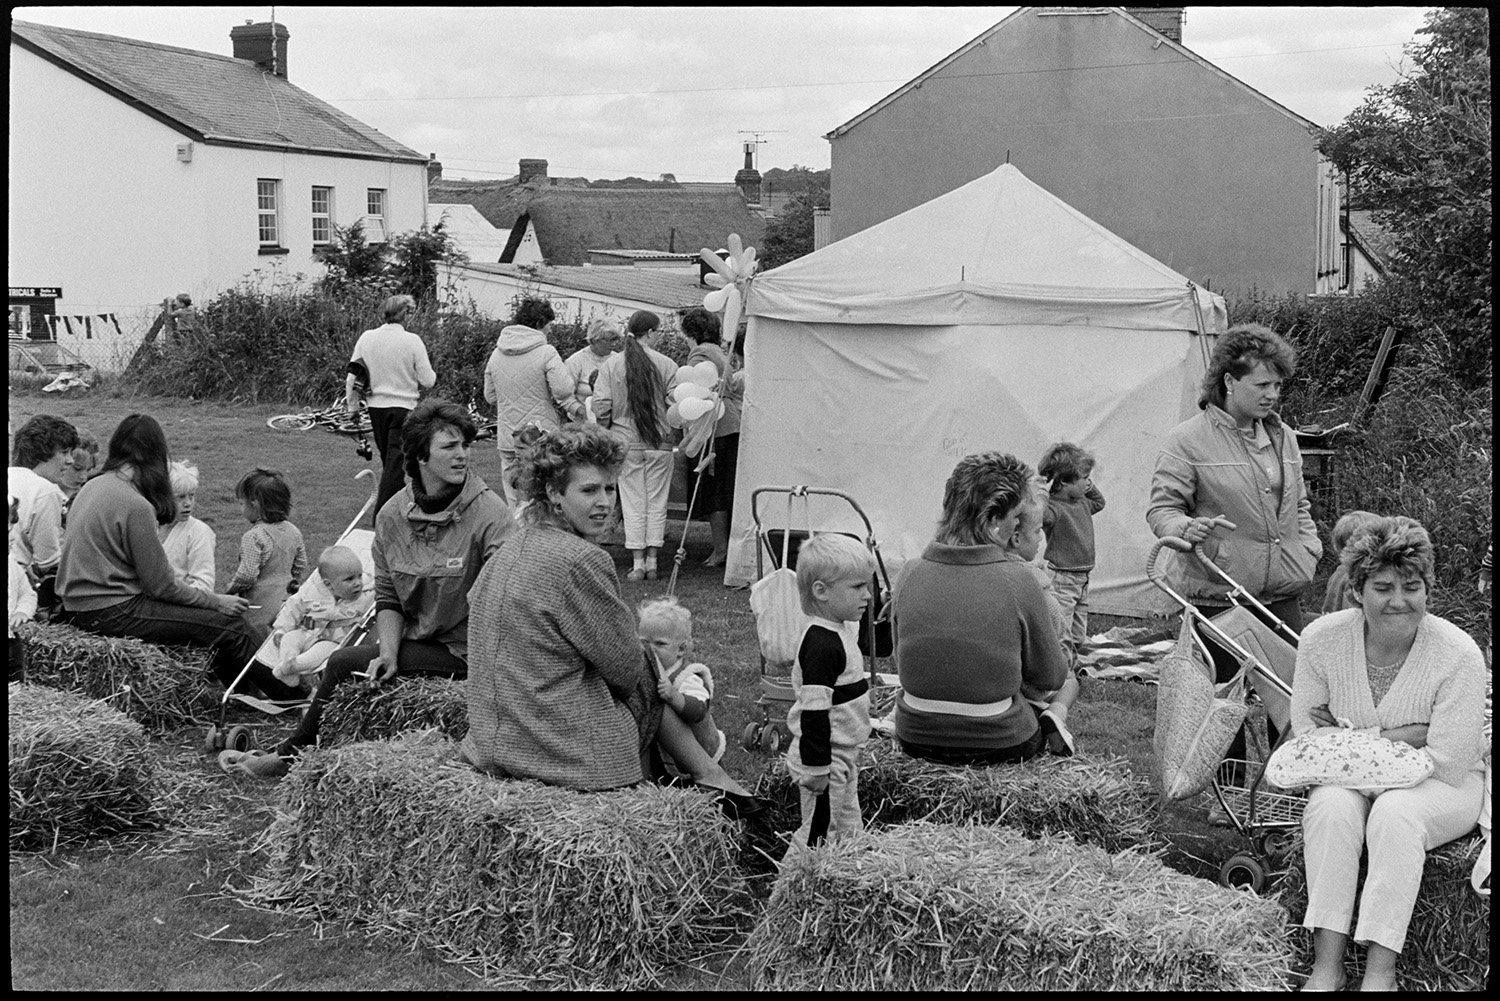 School sports day, refreshment tent, children and spectators. 
[Women and children sat on hay bales at Dolton School sports day. Some of the women have prams. People are gathered around a refreshment table in the background by a small tent.]